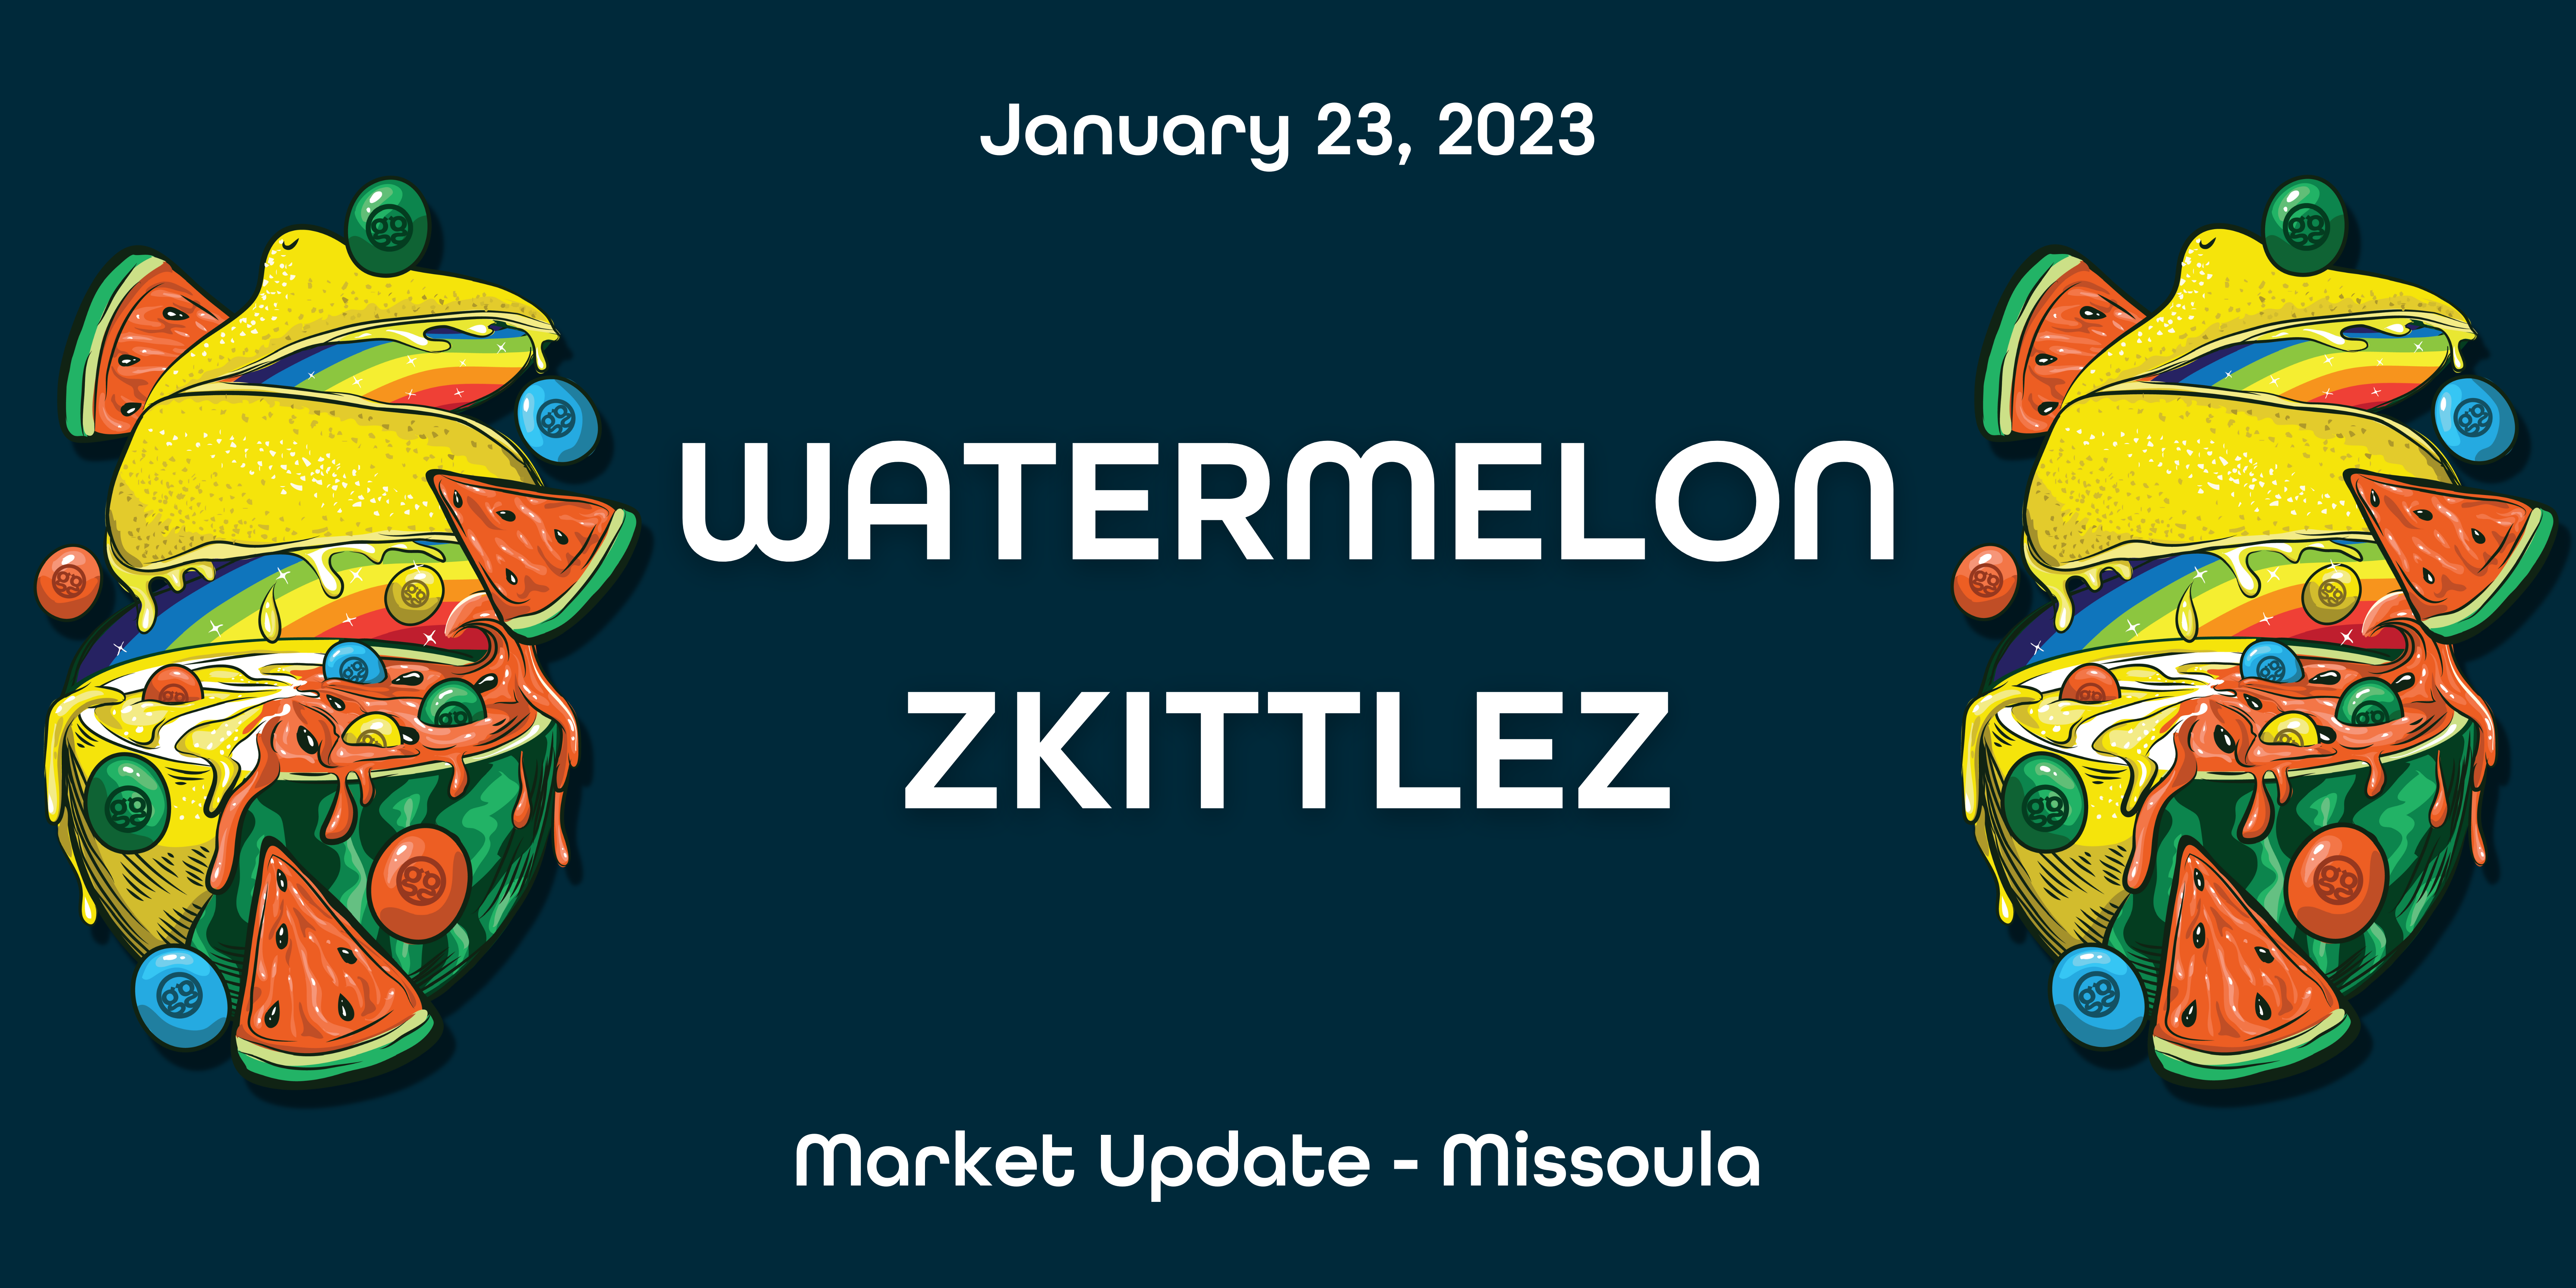 Groove Report: Watermelon Zkittlez Now Available in Missoula 🍉